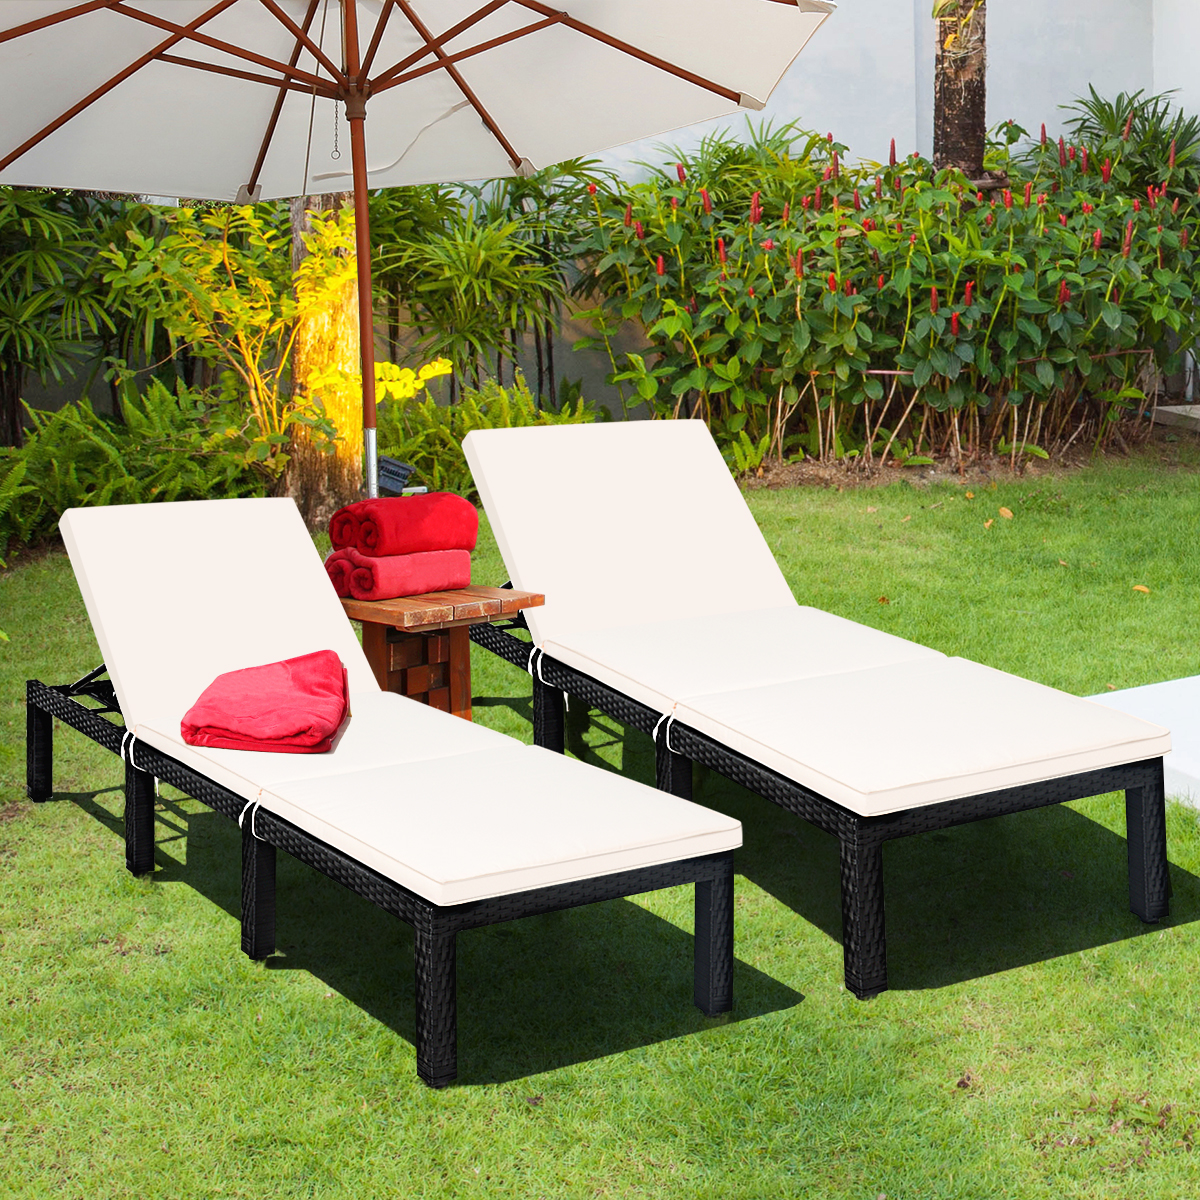 Costway 2PCS Patio Garden Rattan Lounge Chair Chaise Couch Cushioned Height Adjustable White - image 3 of 10